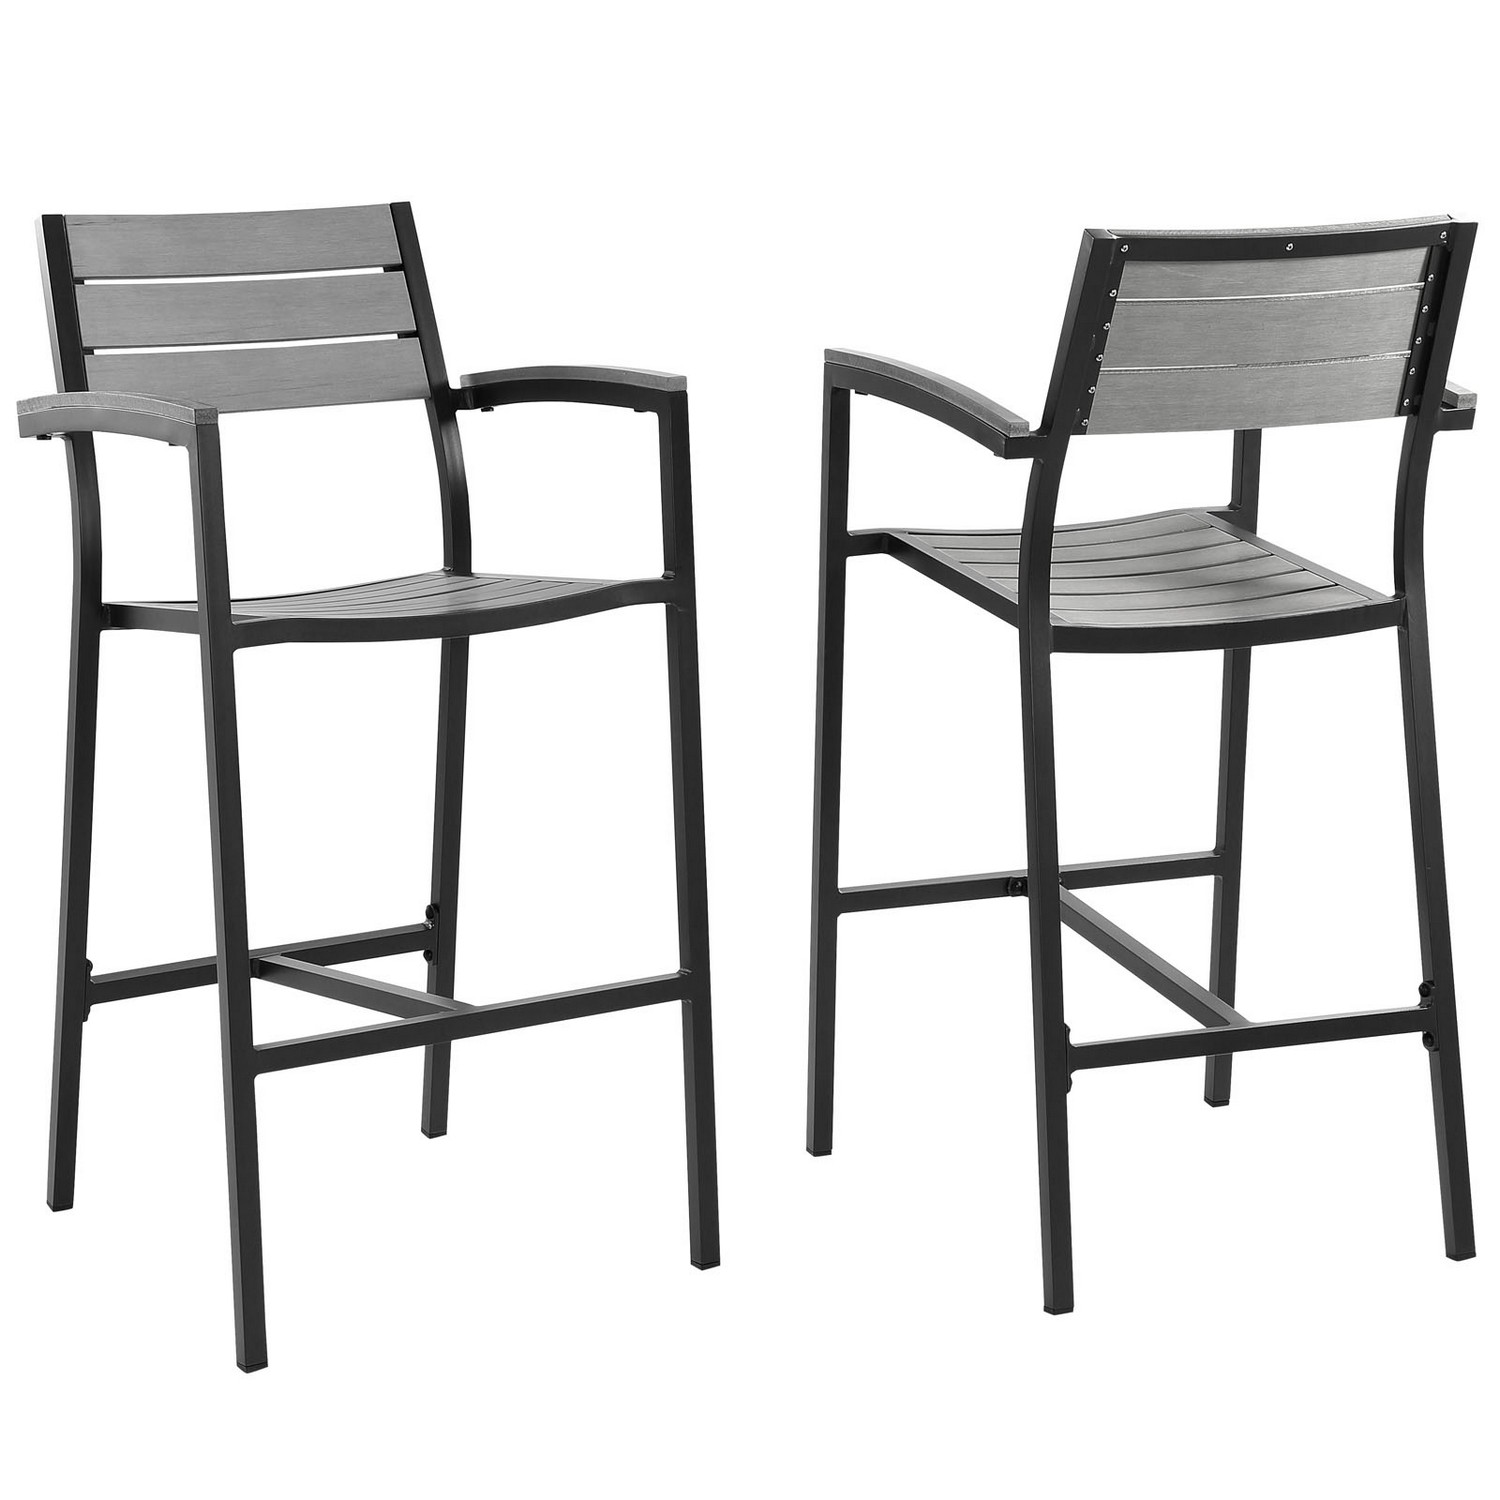 Modway Maine Bar Stool Outdoor Patio Set of 2 - Brown/Gray